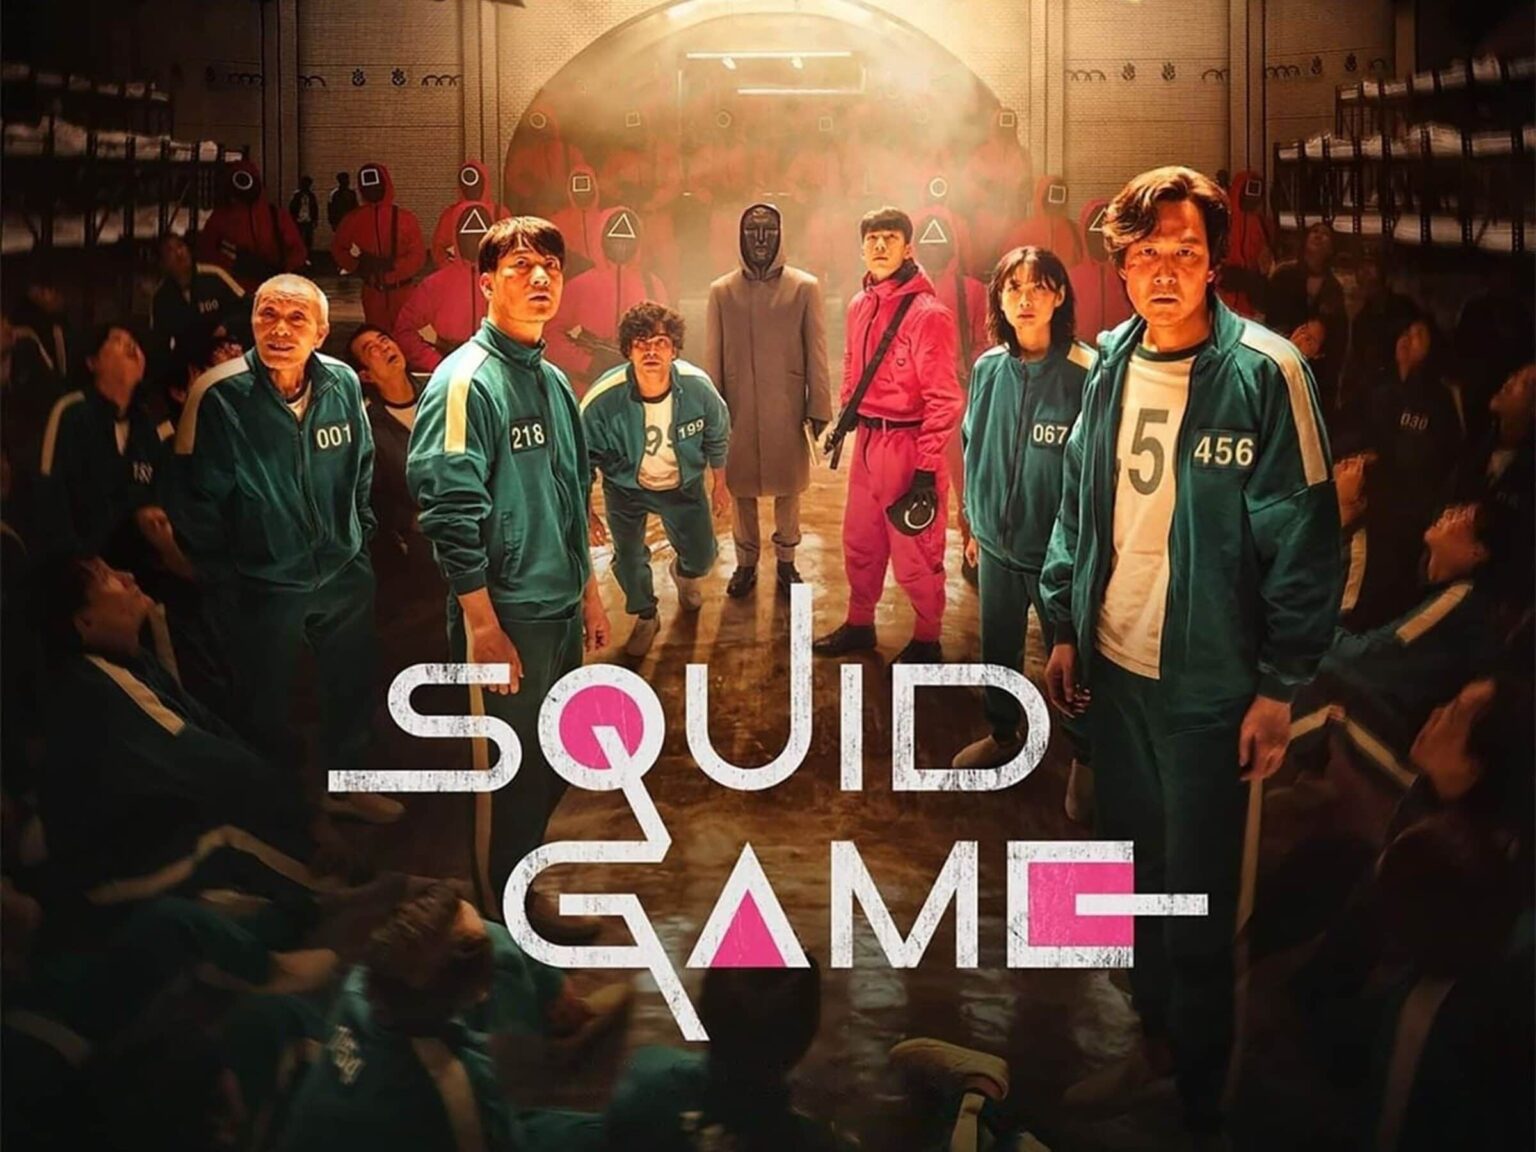 We all have some thoughts on the similarities between 'Squid Game' and 'As the Gods Will'. Find out if the Netflix show is copying the movie!